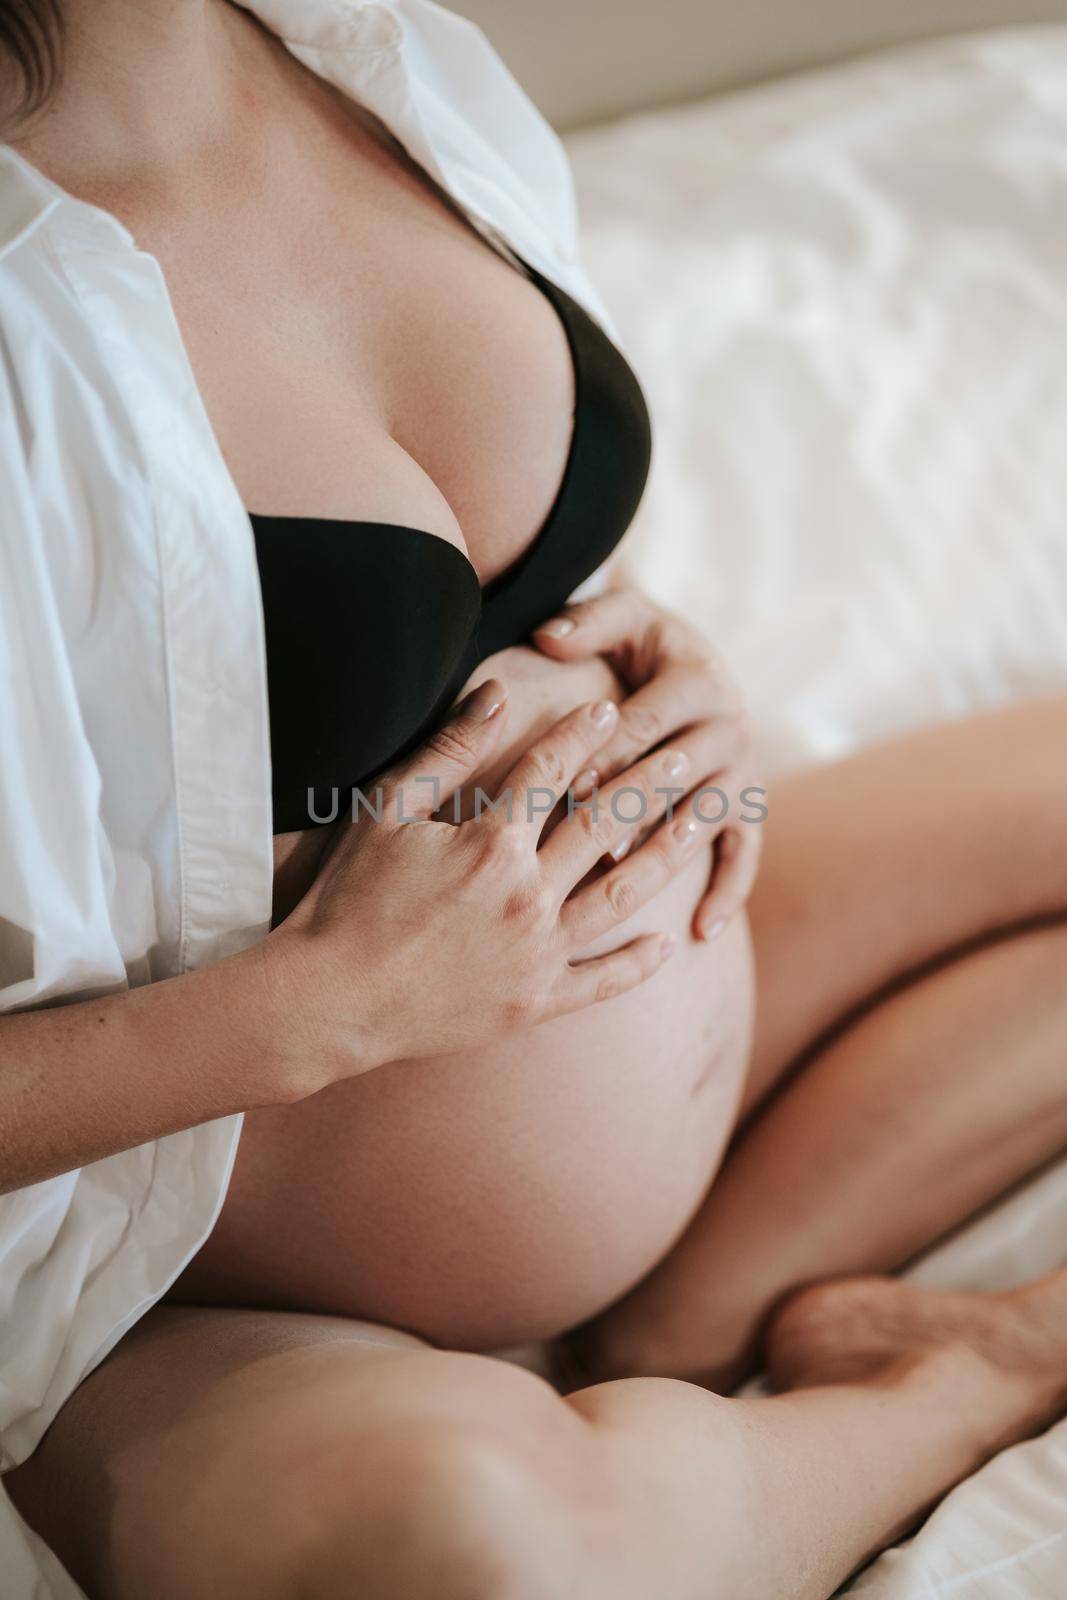 Pregnant woman sits on bed in black bra holding hands on belly by Praximon